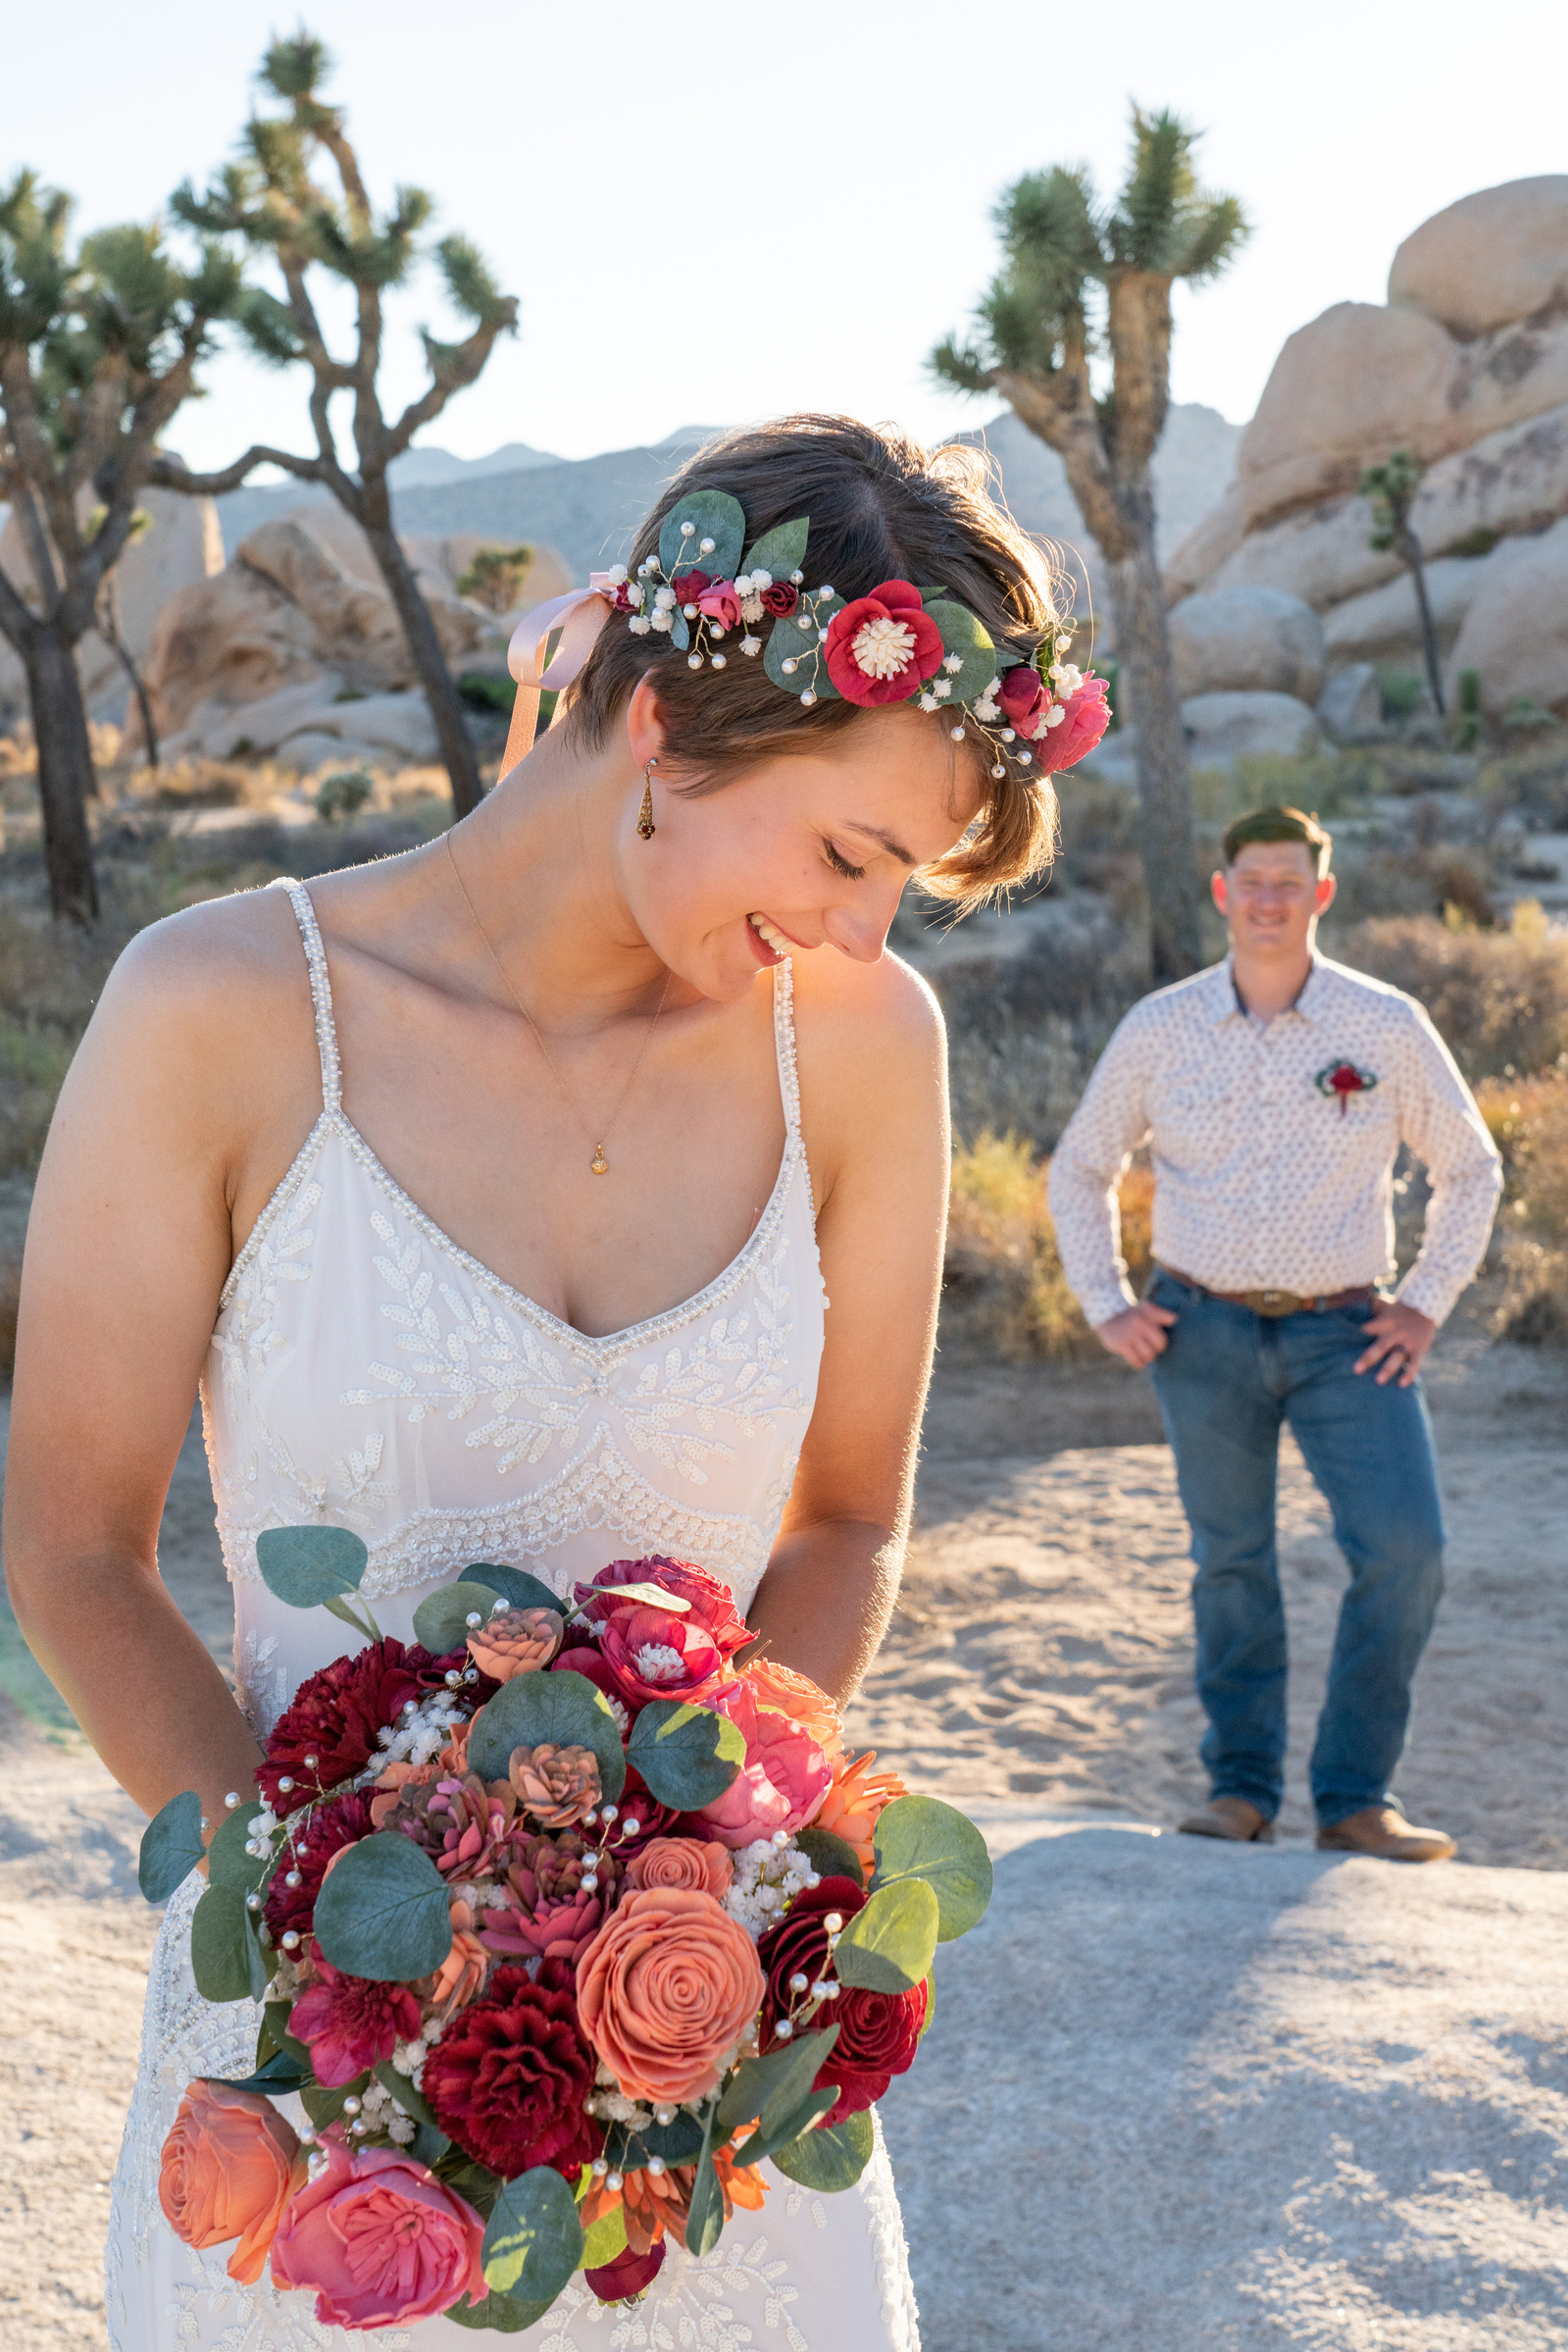 Boho bride poses with headband and flowers smiling and laughing while groom stands in background with hands on hips Hidden Valley Joshua Tree California